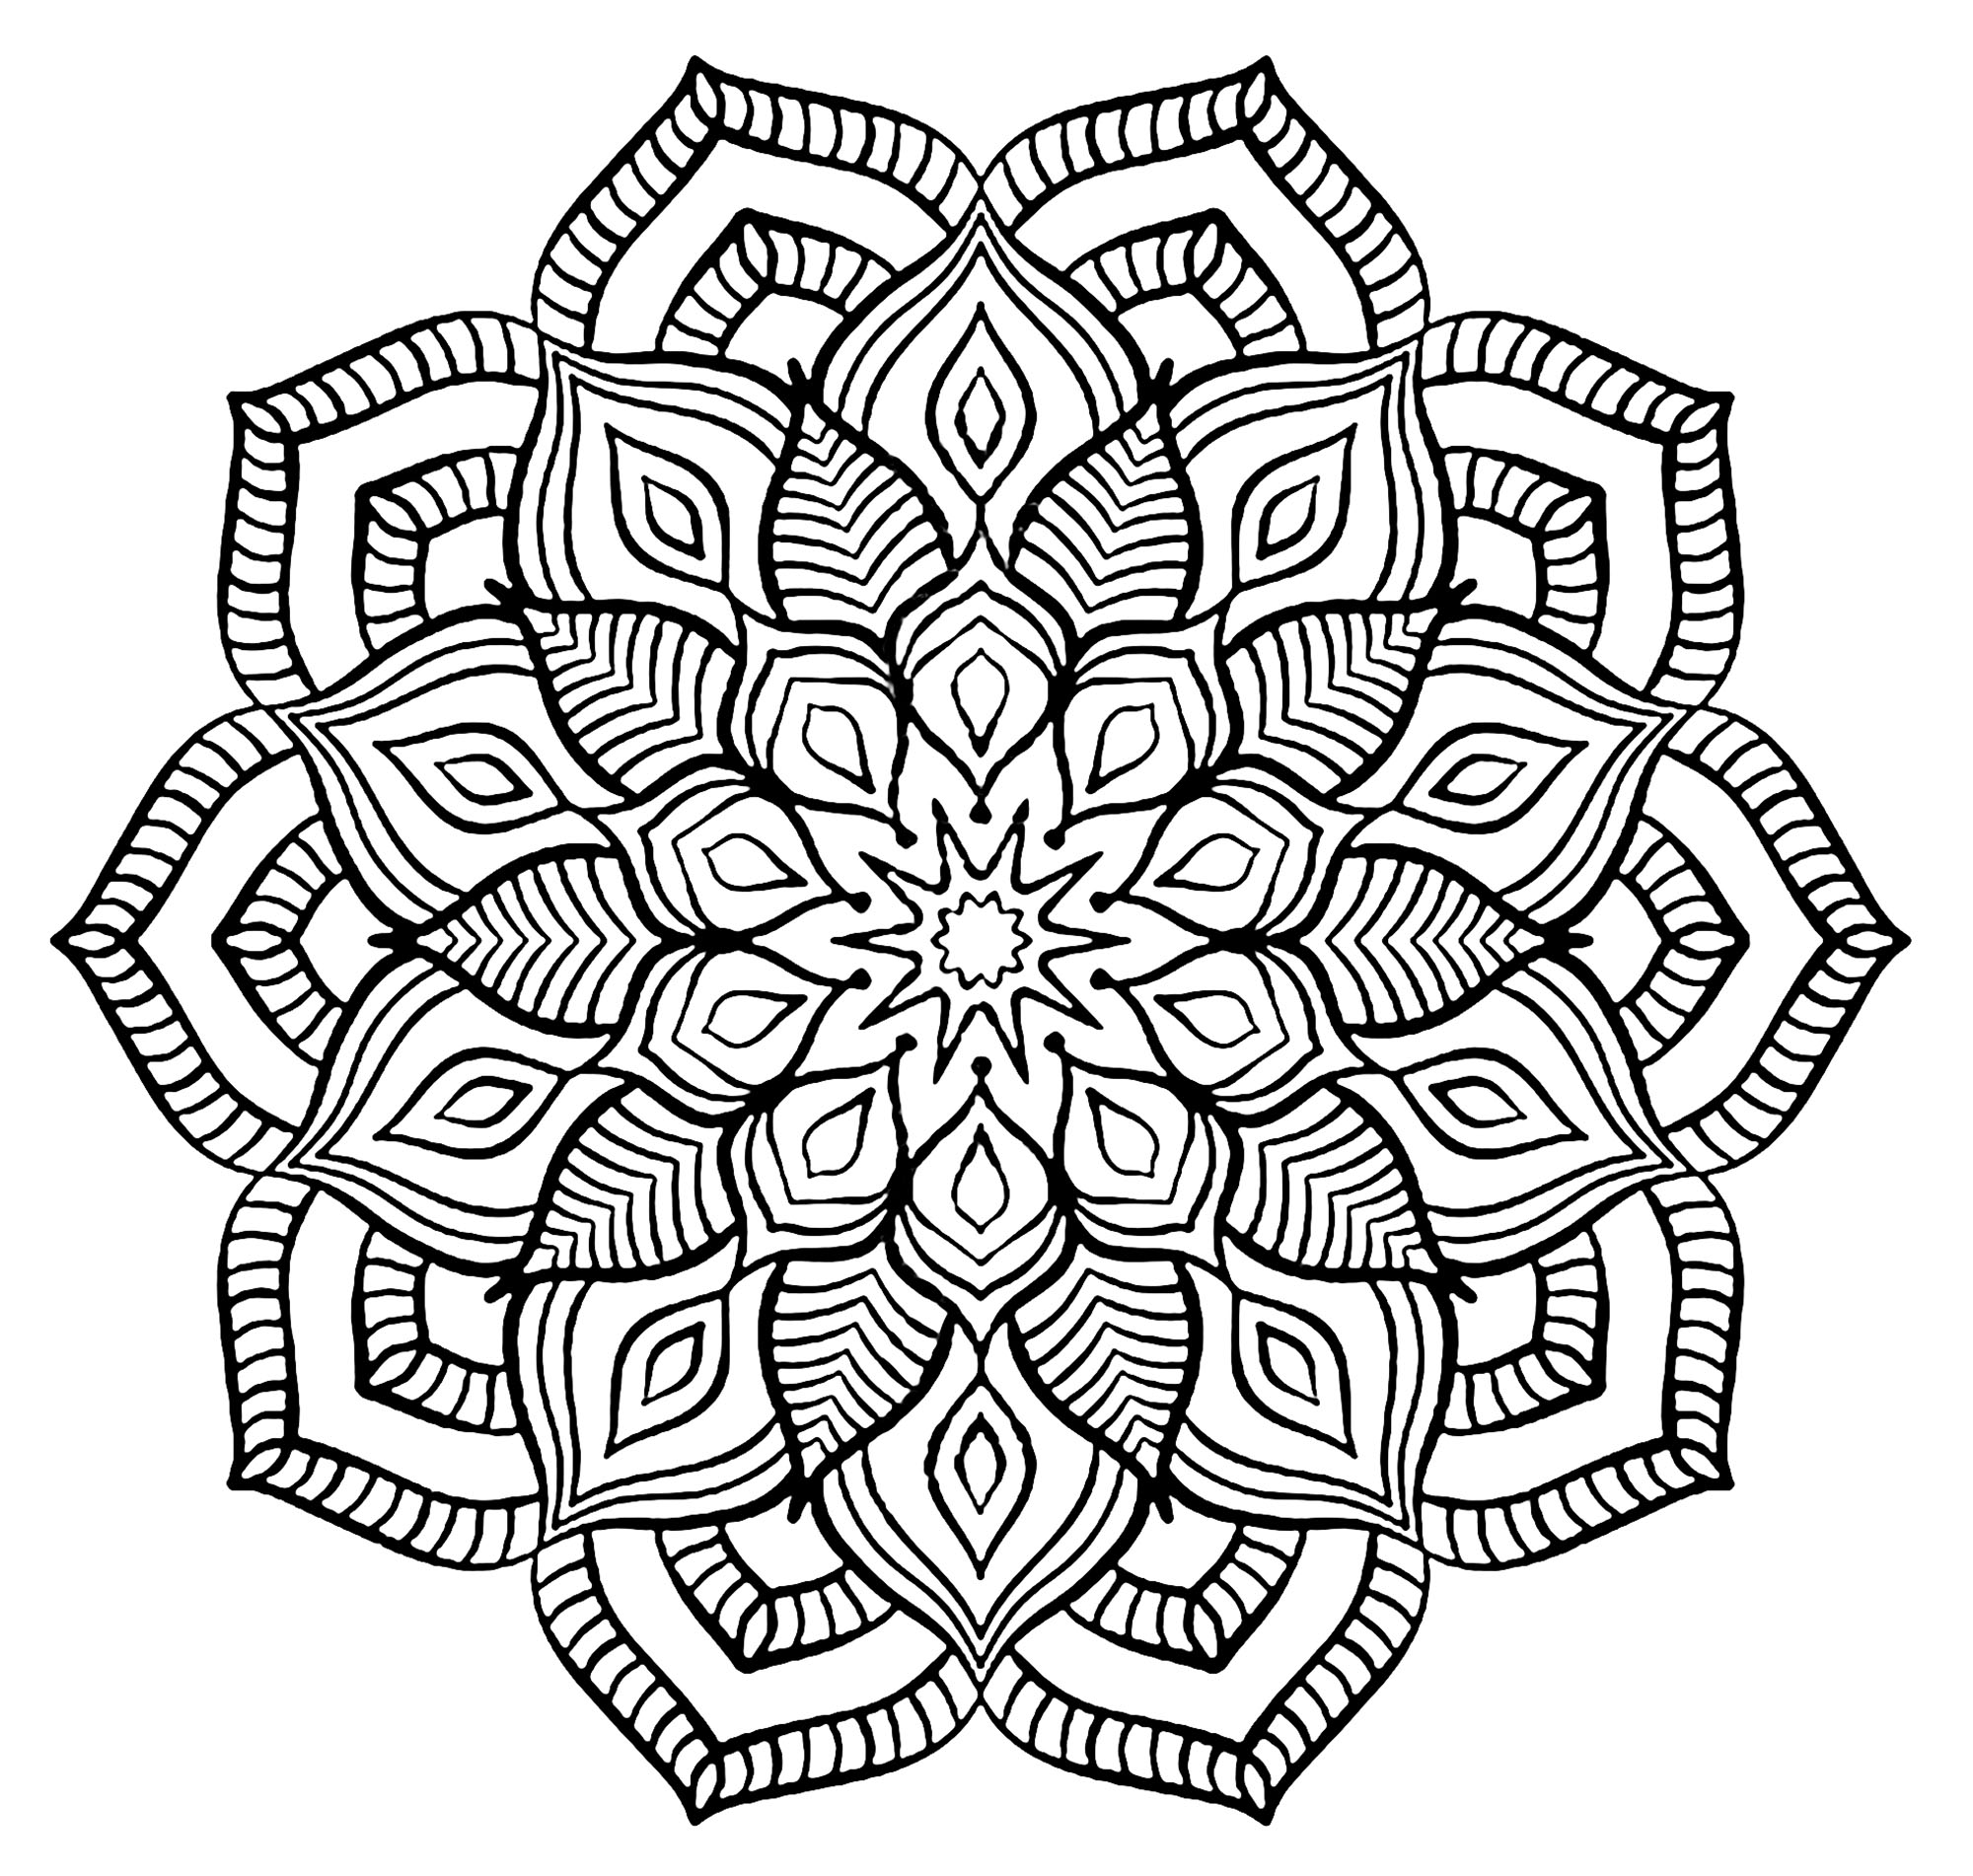 Cartoon Mandala Coloring Pages For Kids for Adult